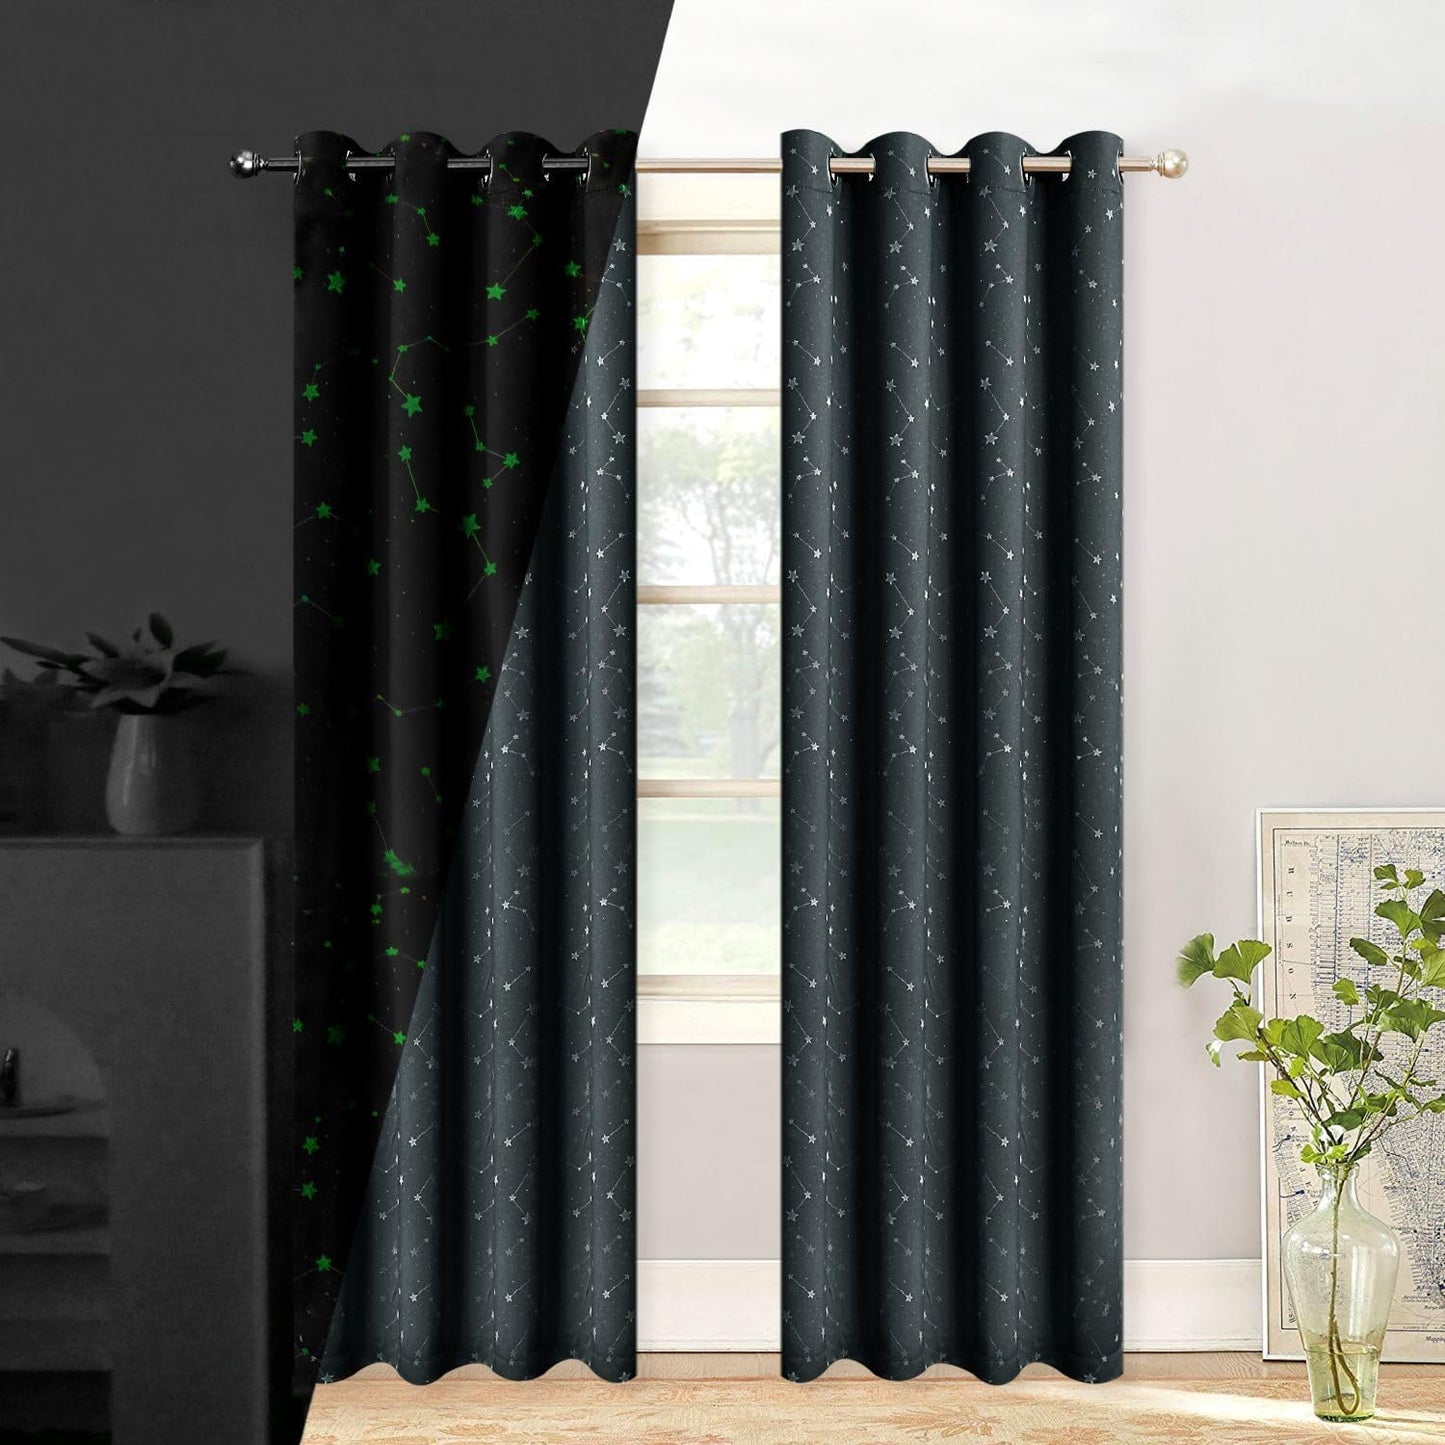 TMLTCOR Blackout Curtains for Bedroom,Bedroom Curtains for Living Room,Room Darkening Curtains 84 Inches Long,Glow in the Dark Navy Blue Curtains for Kids Bedroom,52 Inches Wide,2 Panels,Curve  TMLTCOR Dark Grey/Star 52"W*84"L 